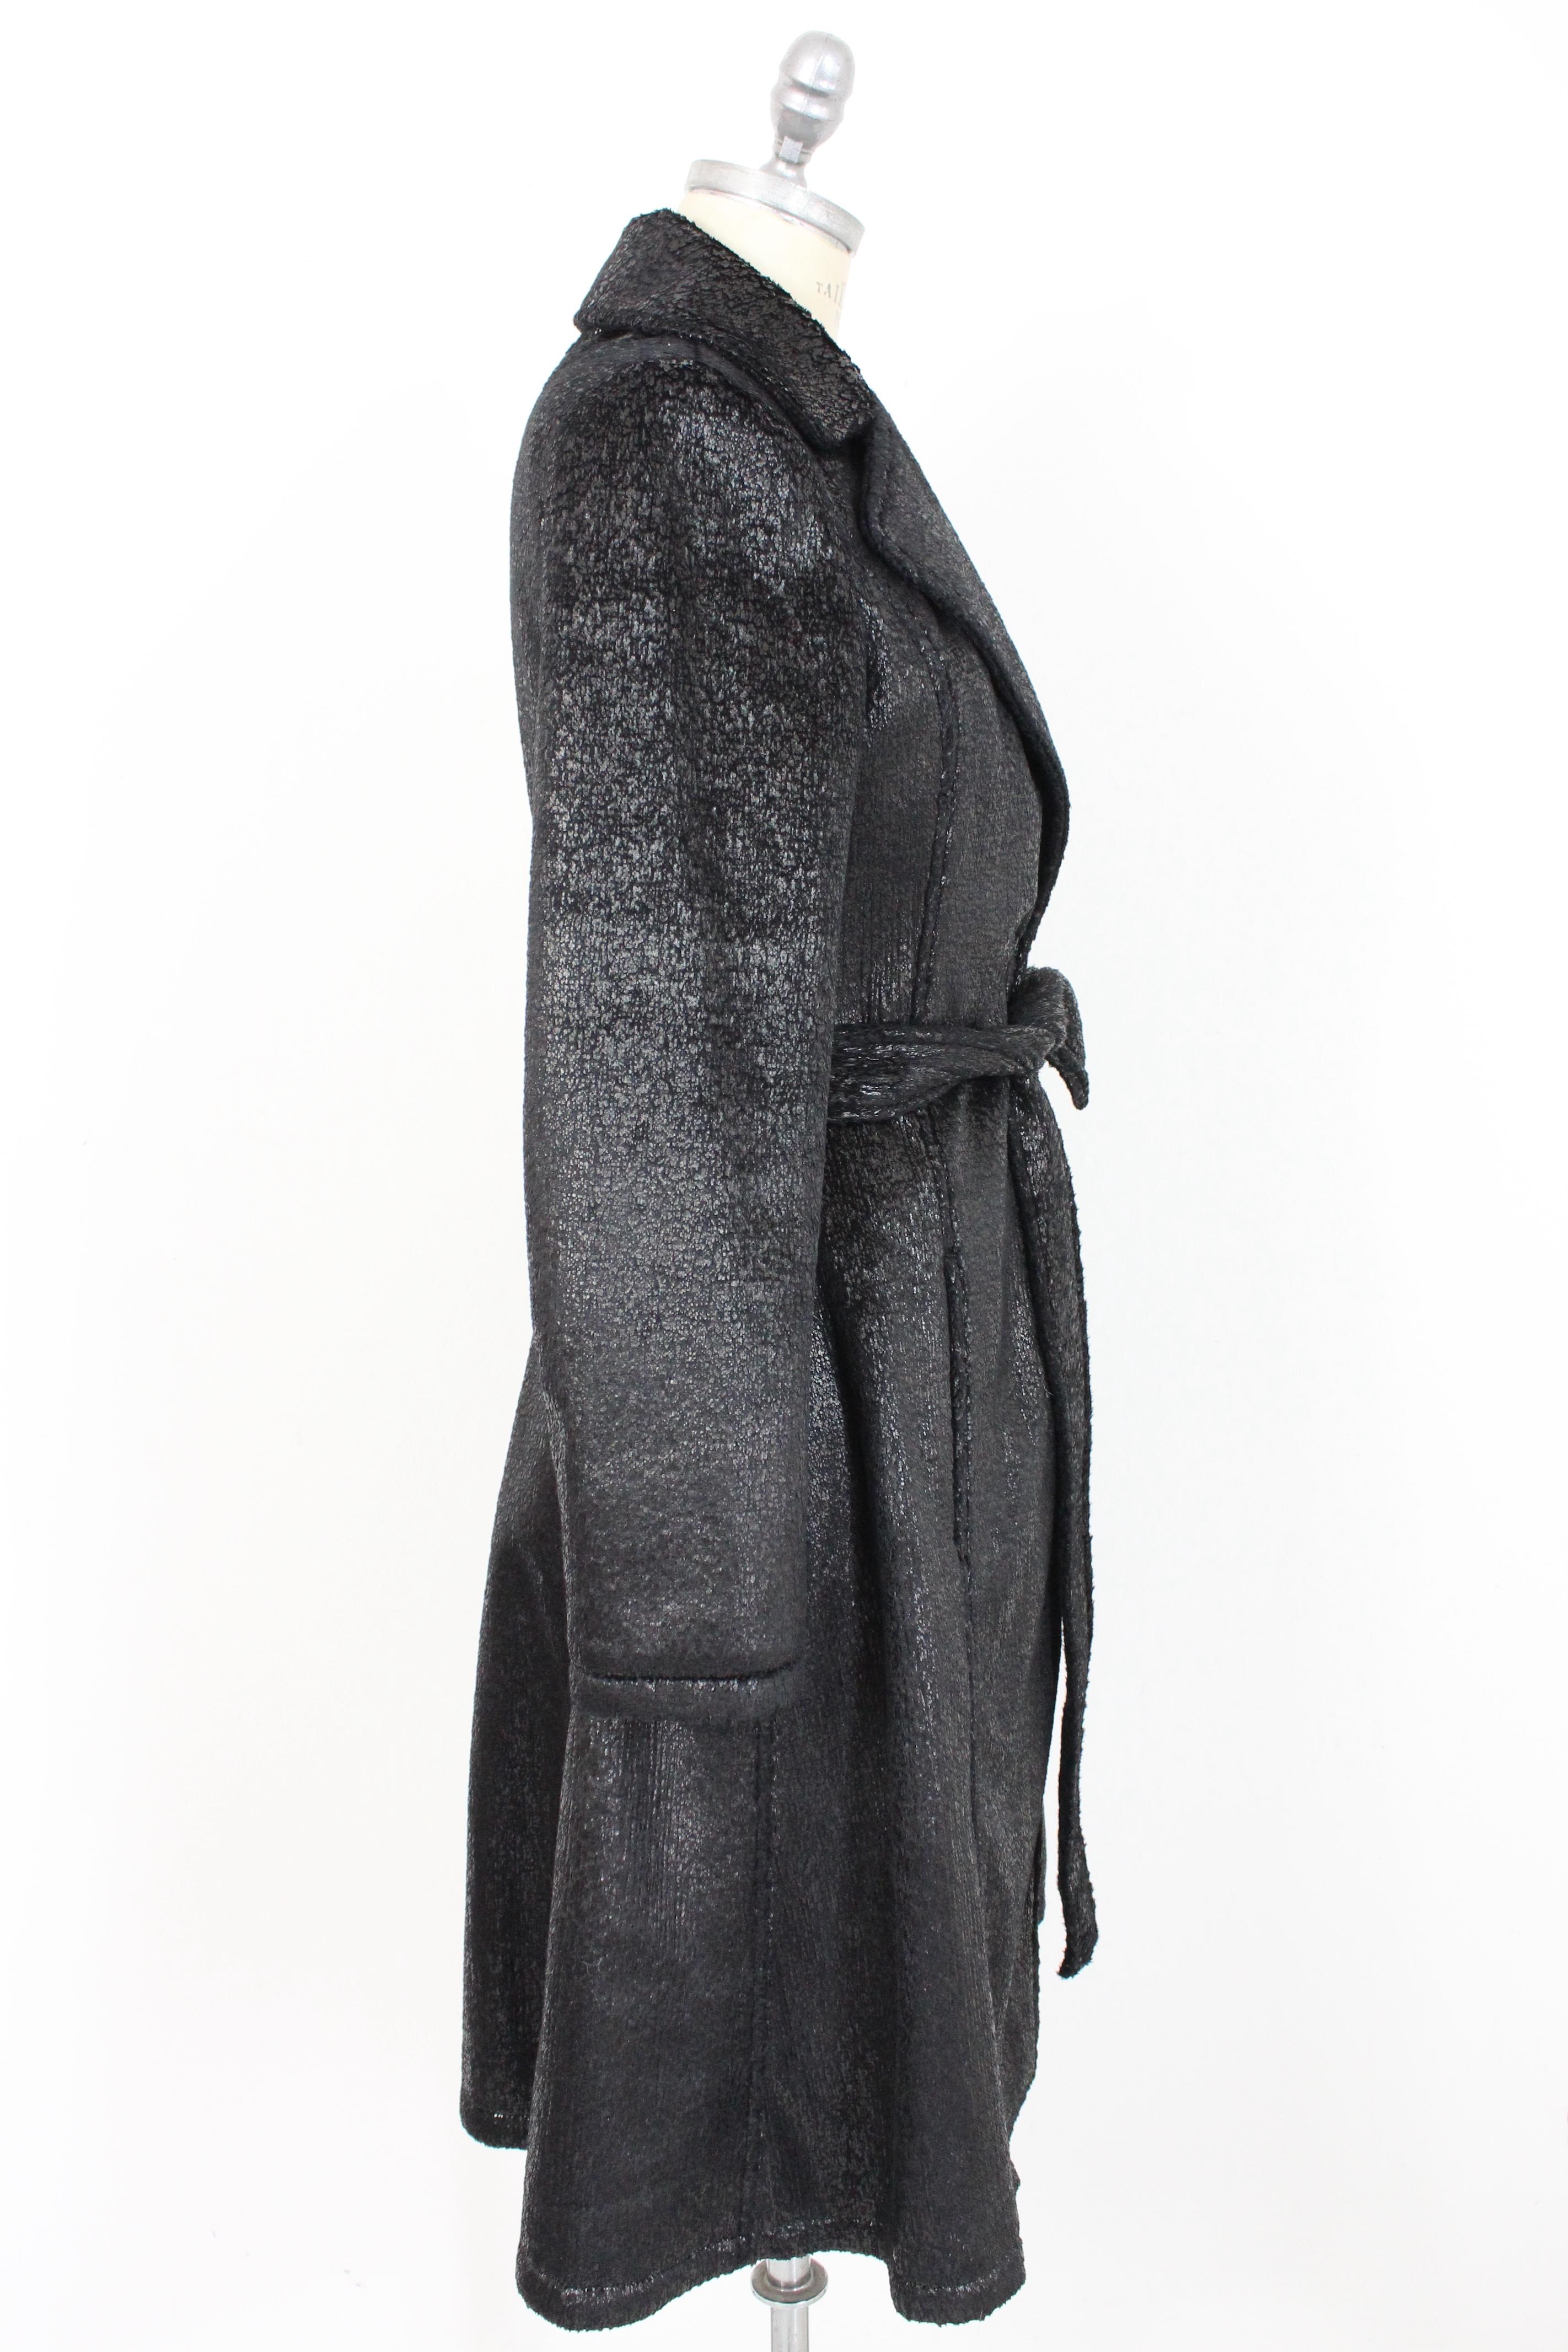 Krizia Black Laminate Long Flared Coat 1980s In Excellent Condition In Brindisi, Bt